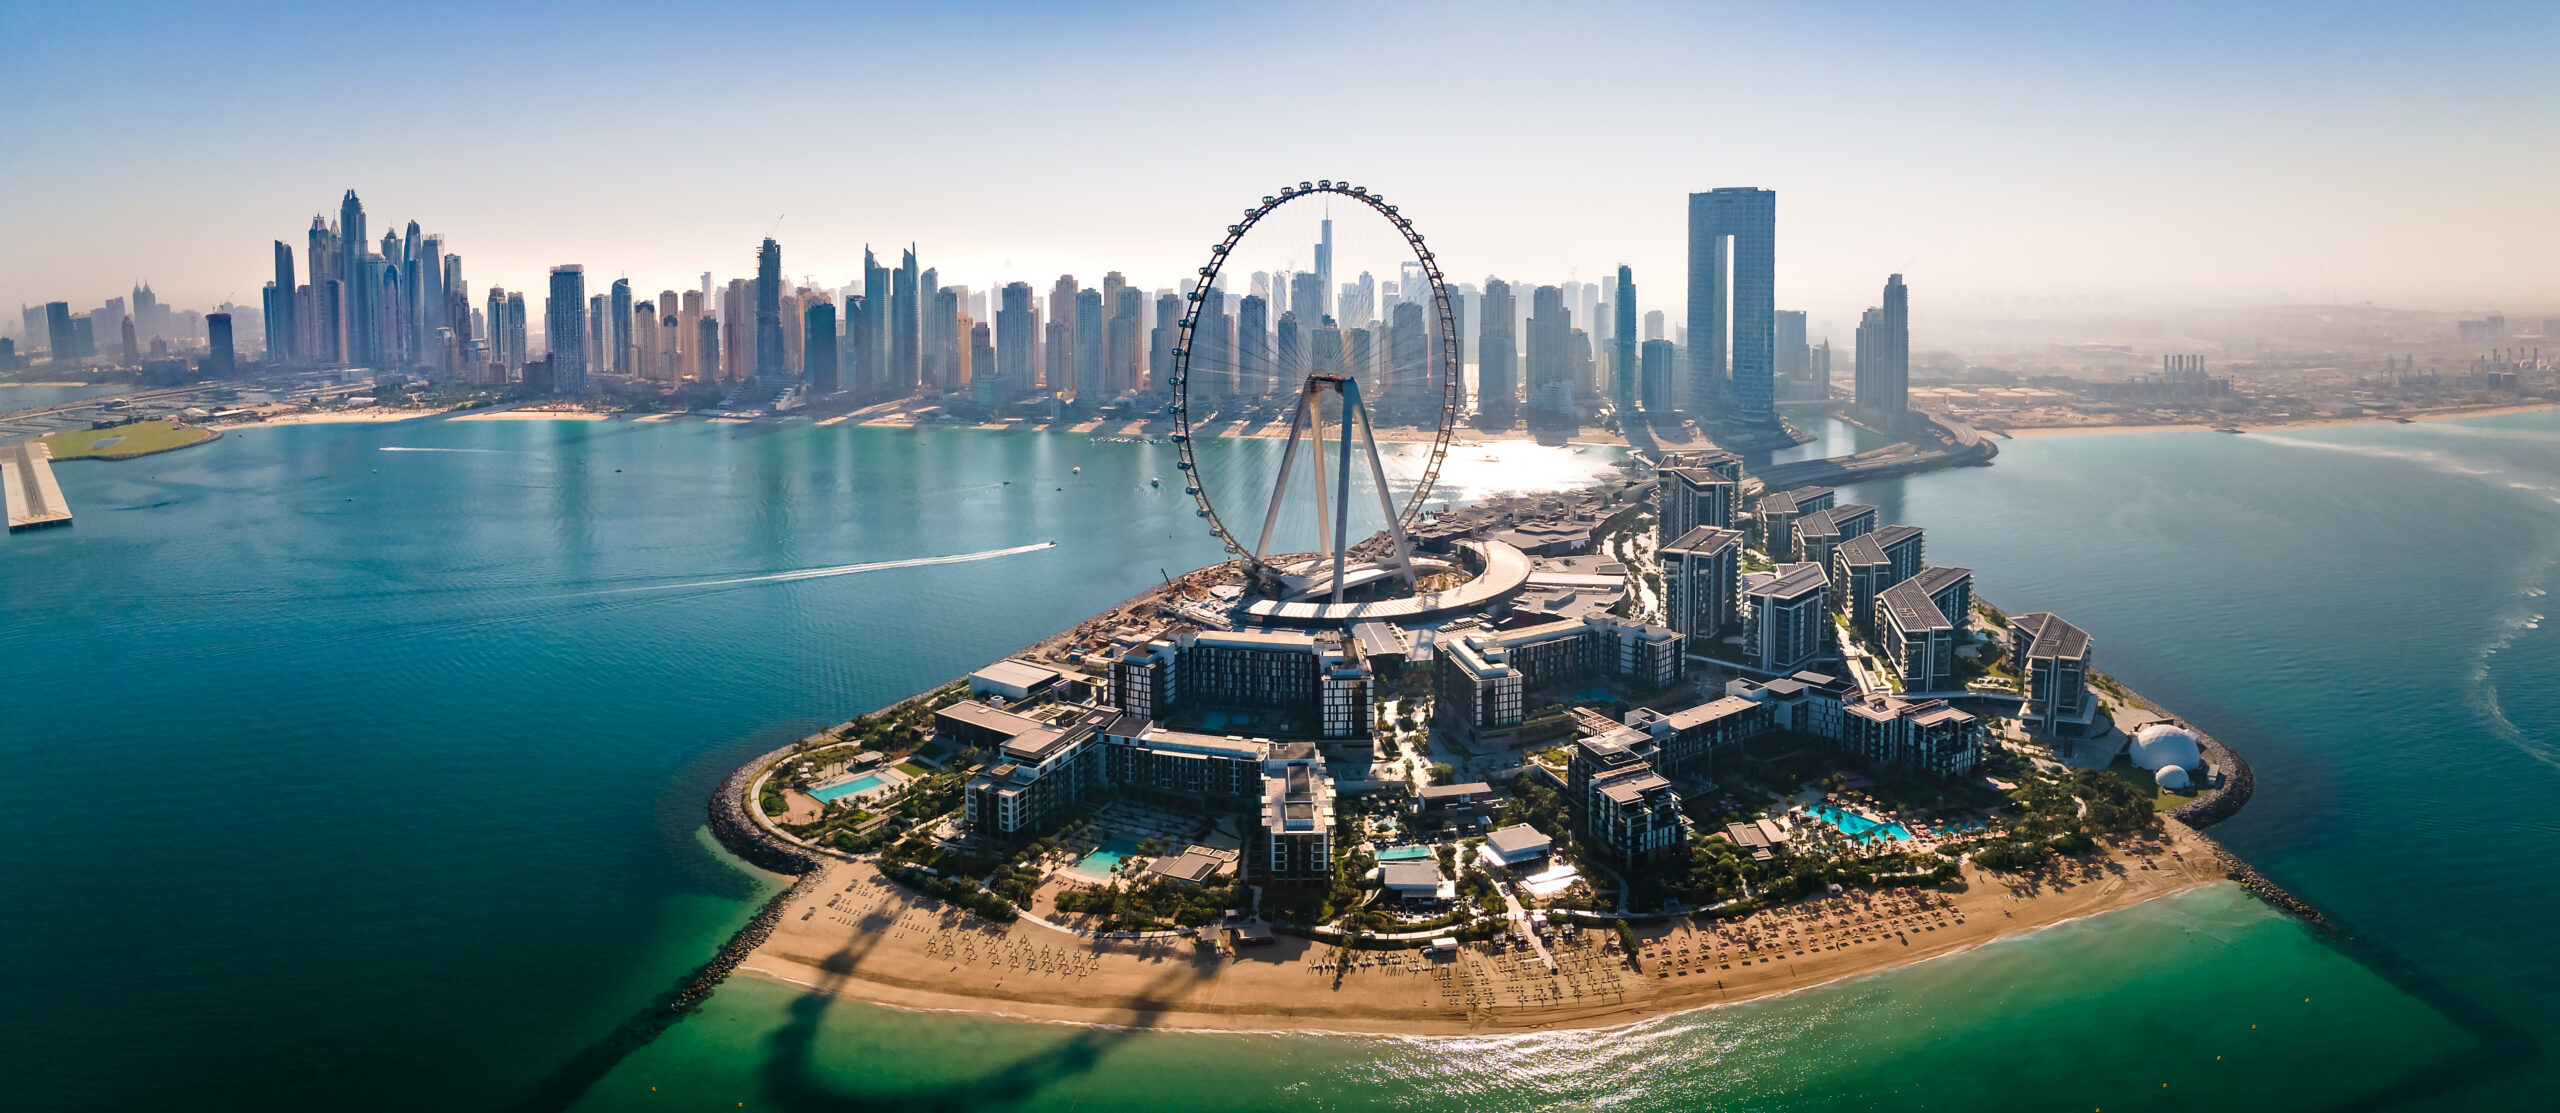 Best Dubai Areas for Tourists - Bluewaters